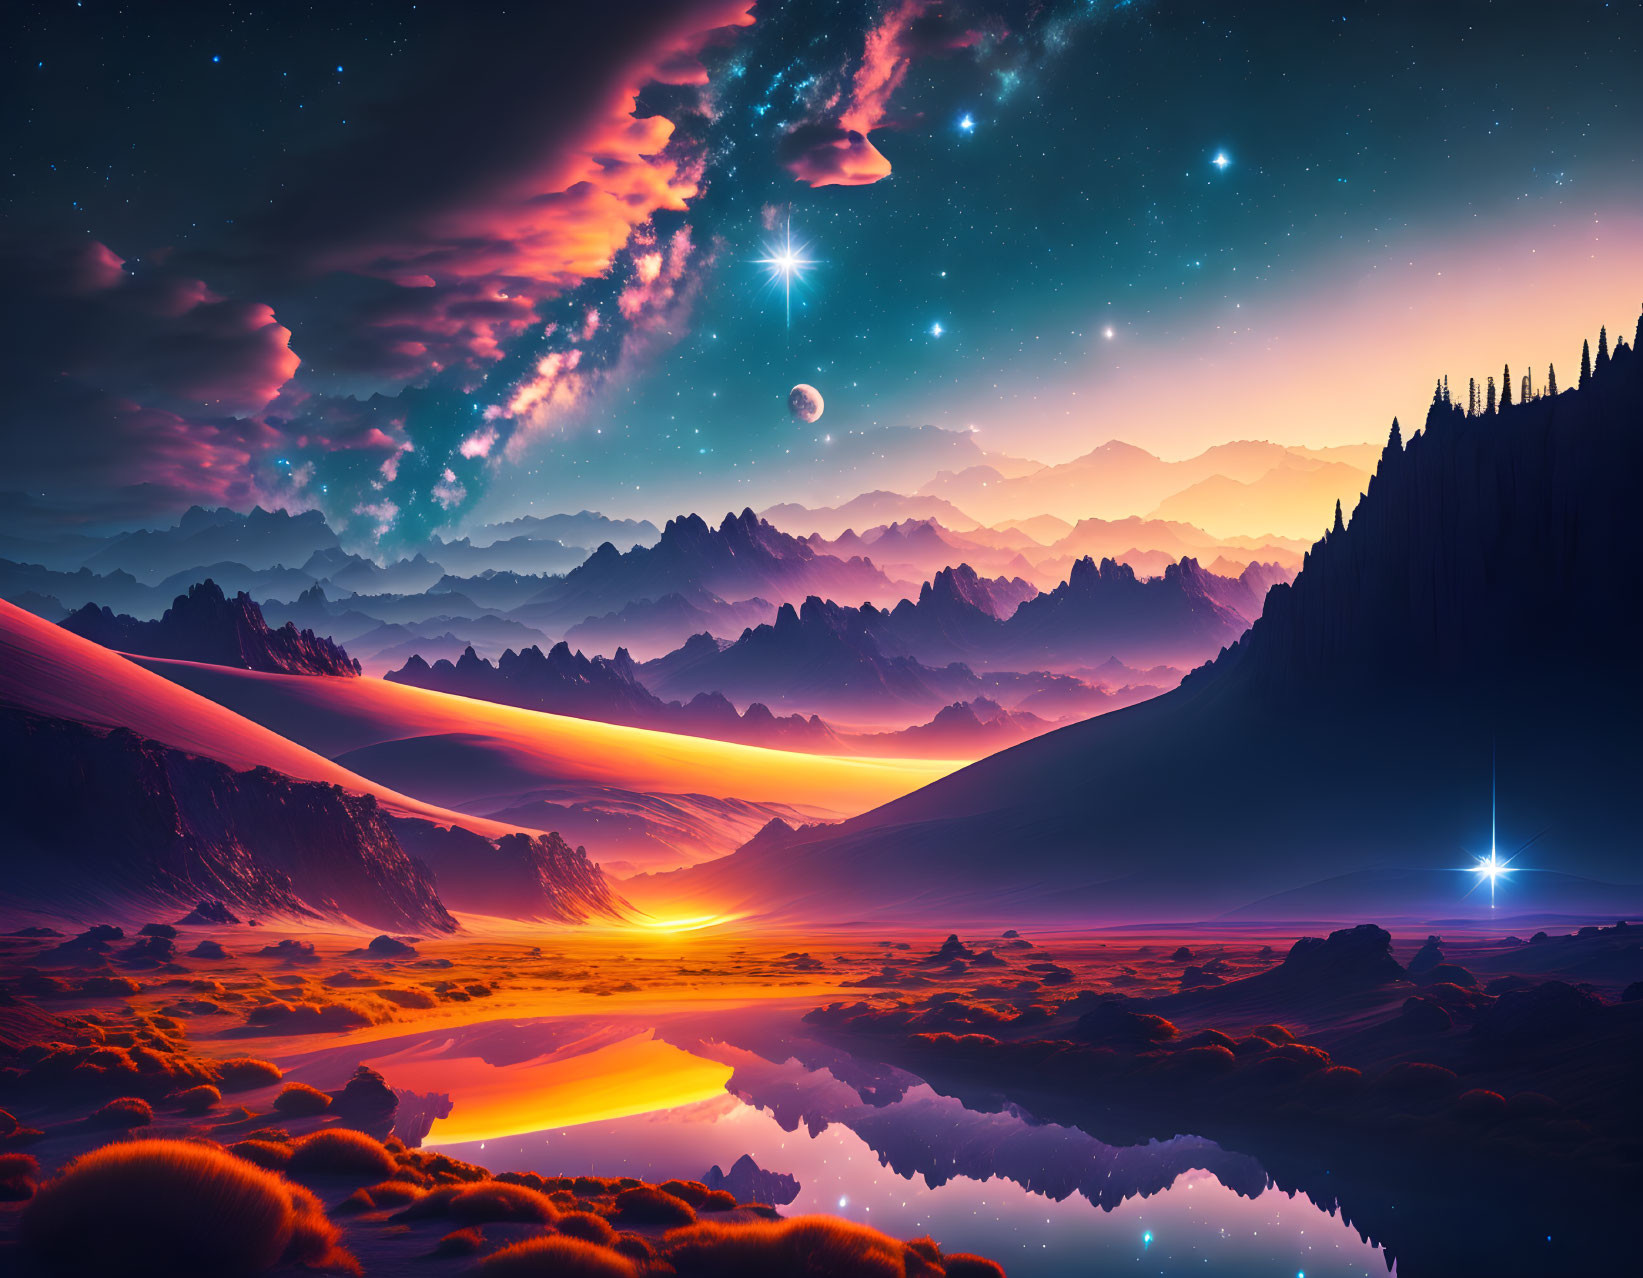 Vibrant sunset colors in surreal landscape with starry sky